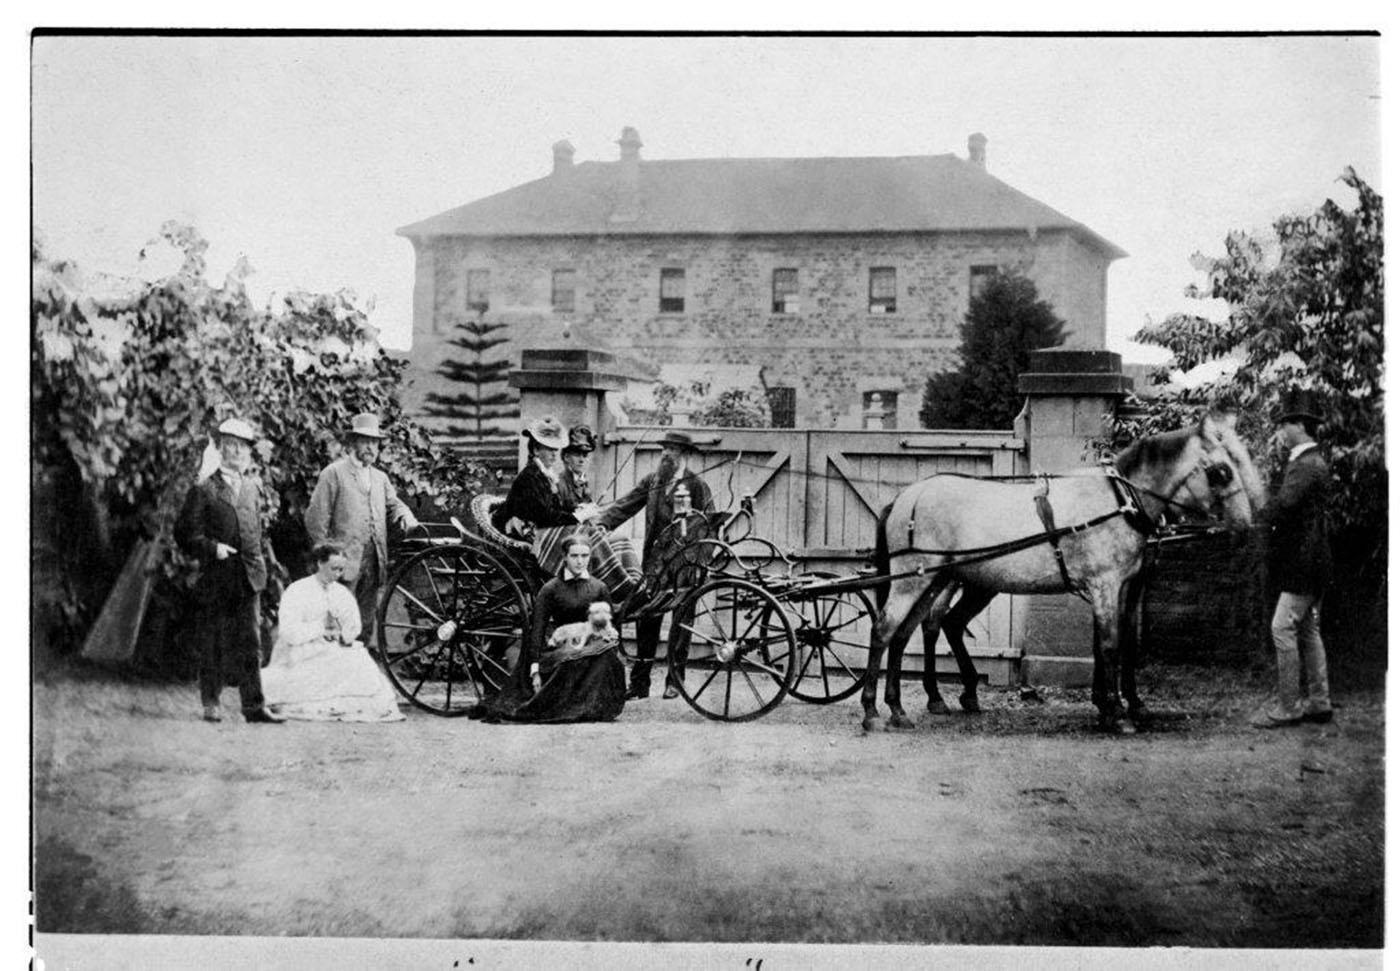 Archer family with horse-drawn carriage in front of Brisbane military barracks.